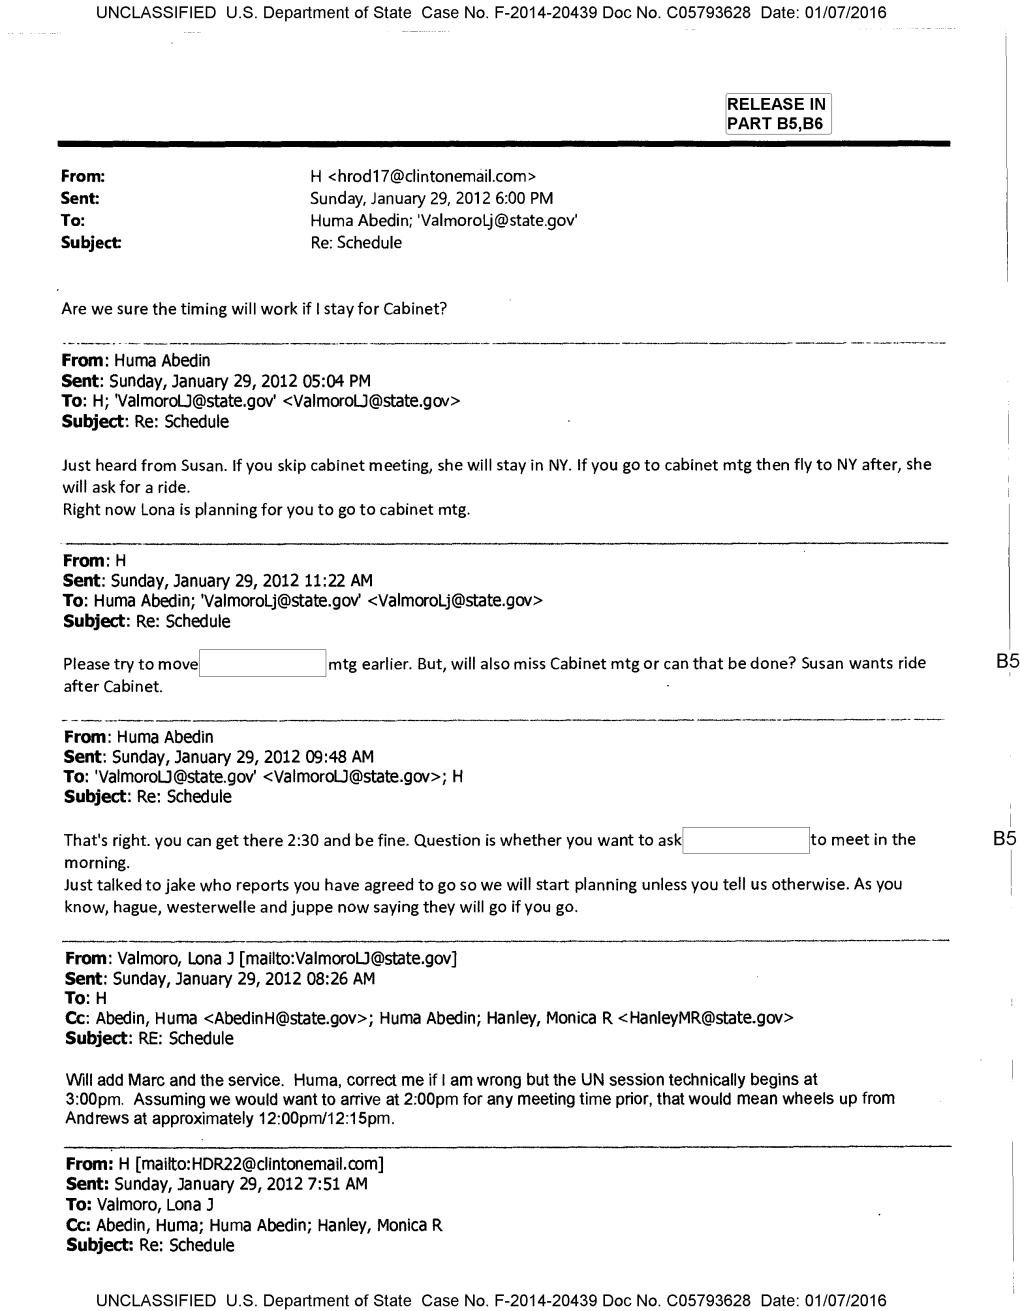 Download Clinton Email January 7 Release